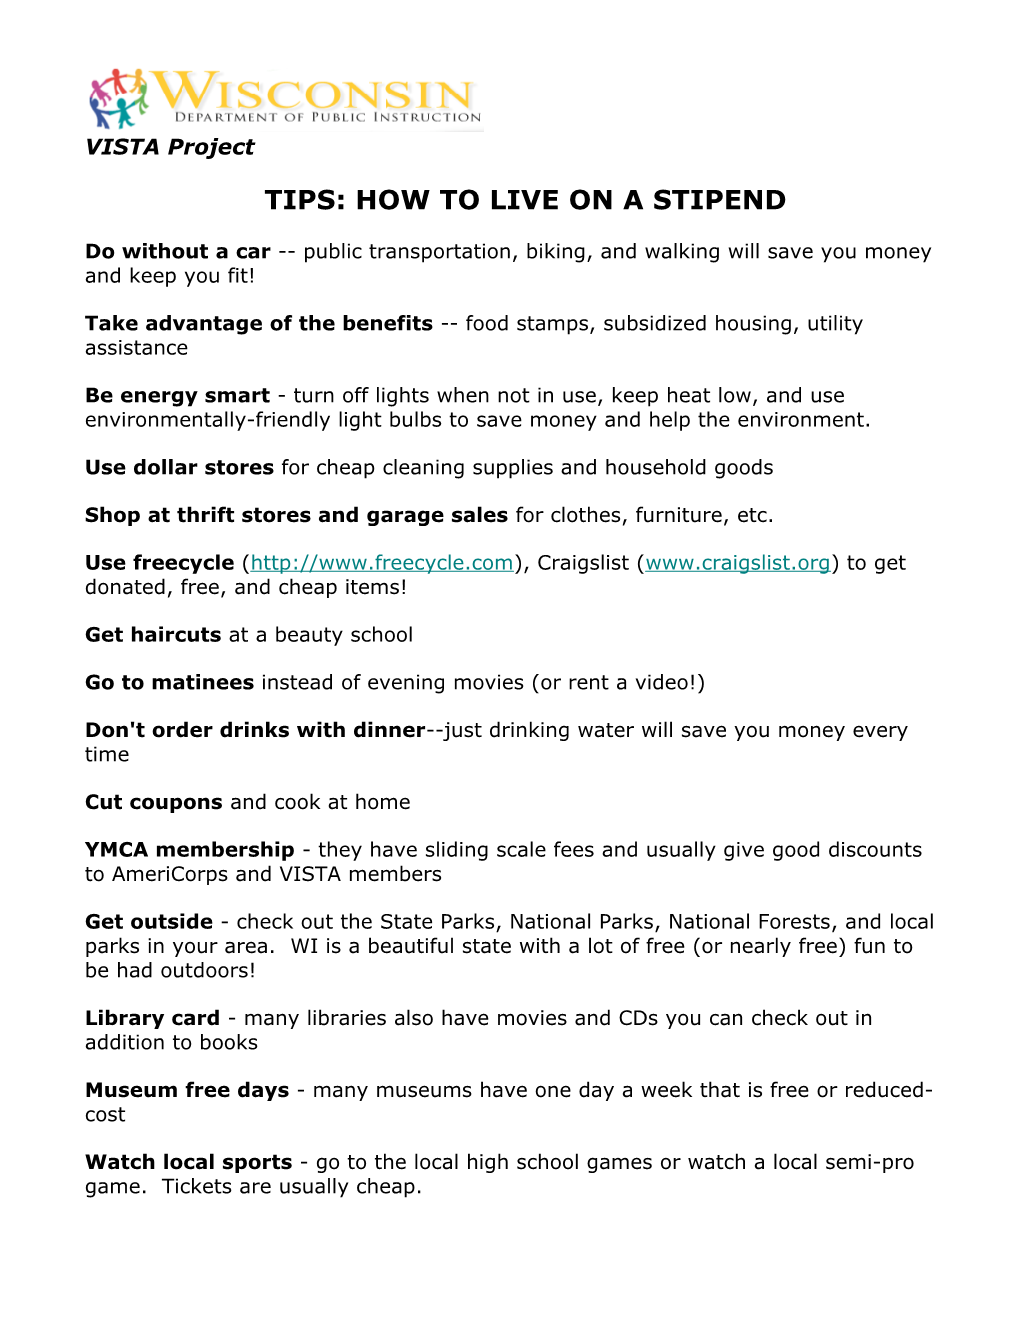 Tips: How to Live on a Stipend